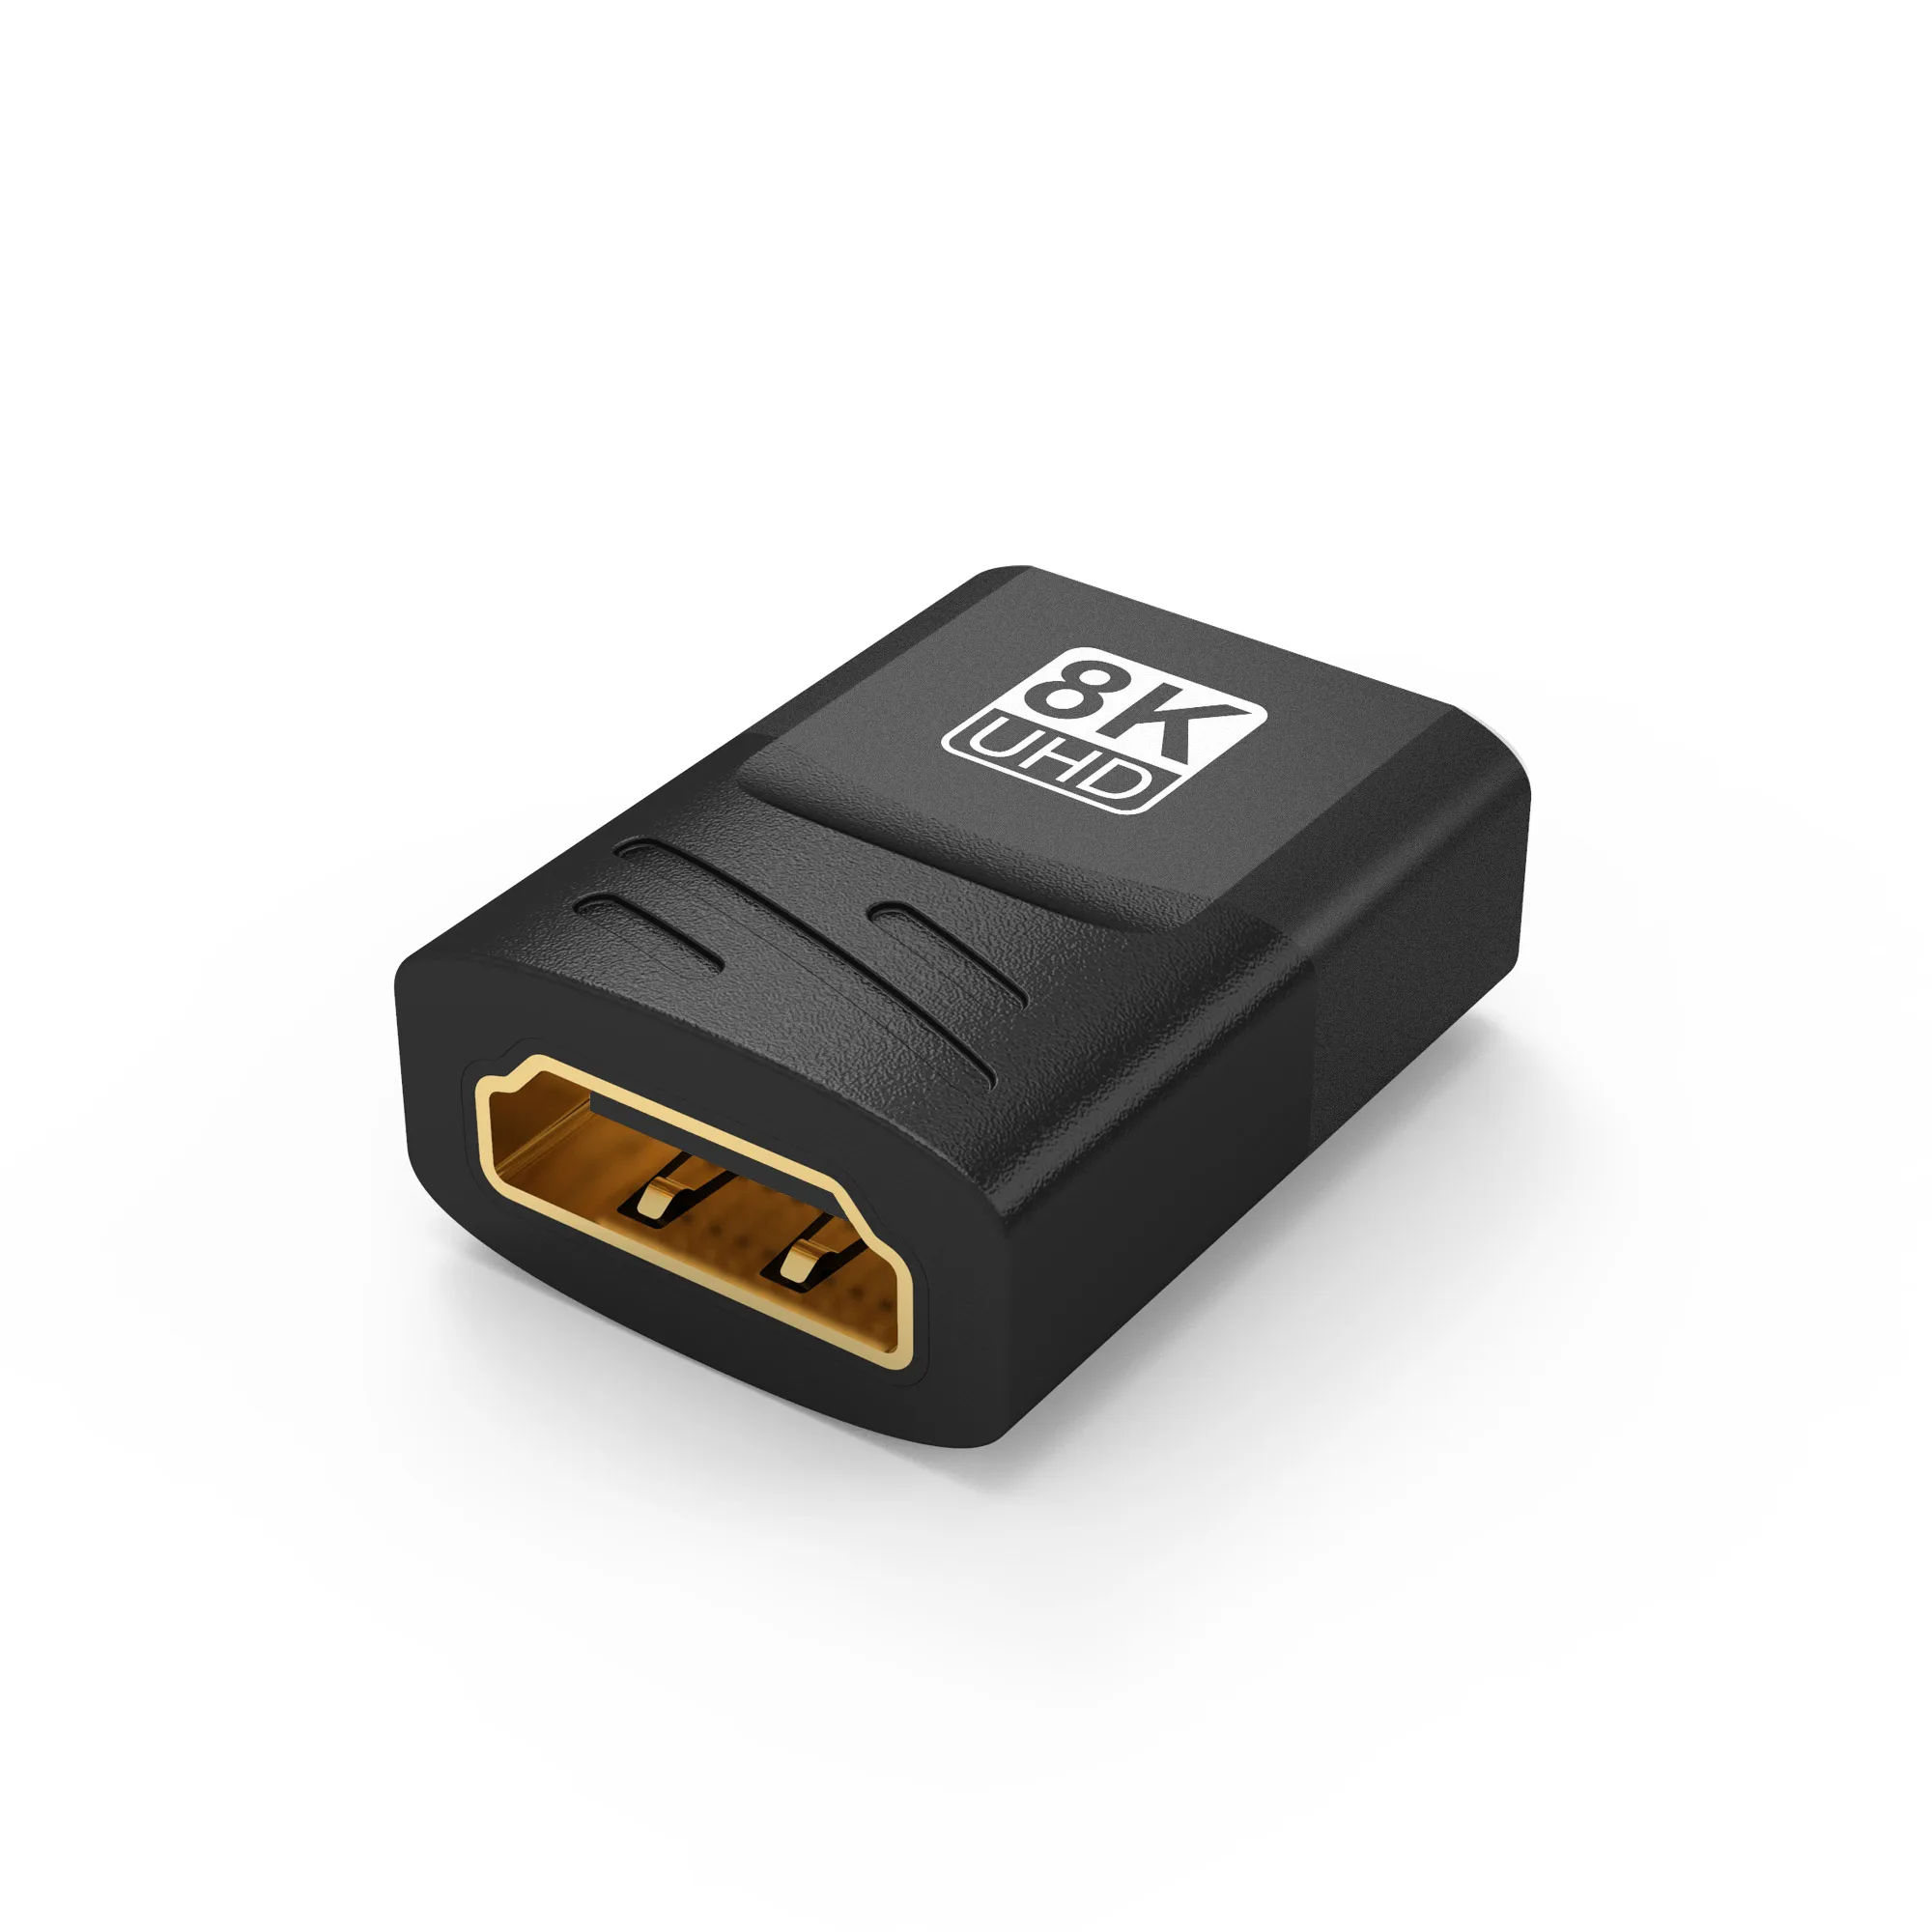 HDMI Coupler 8K, HDMI 2.1 Female to Female Connector HDMI Extension Adapter, Support 8K@60Hz / 4K@120Hz 120UHD, 3D, HDR